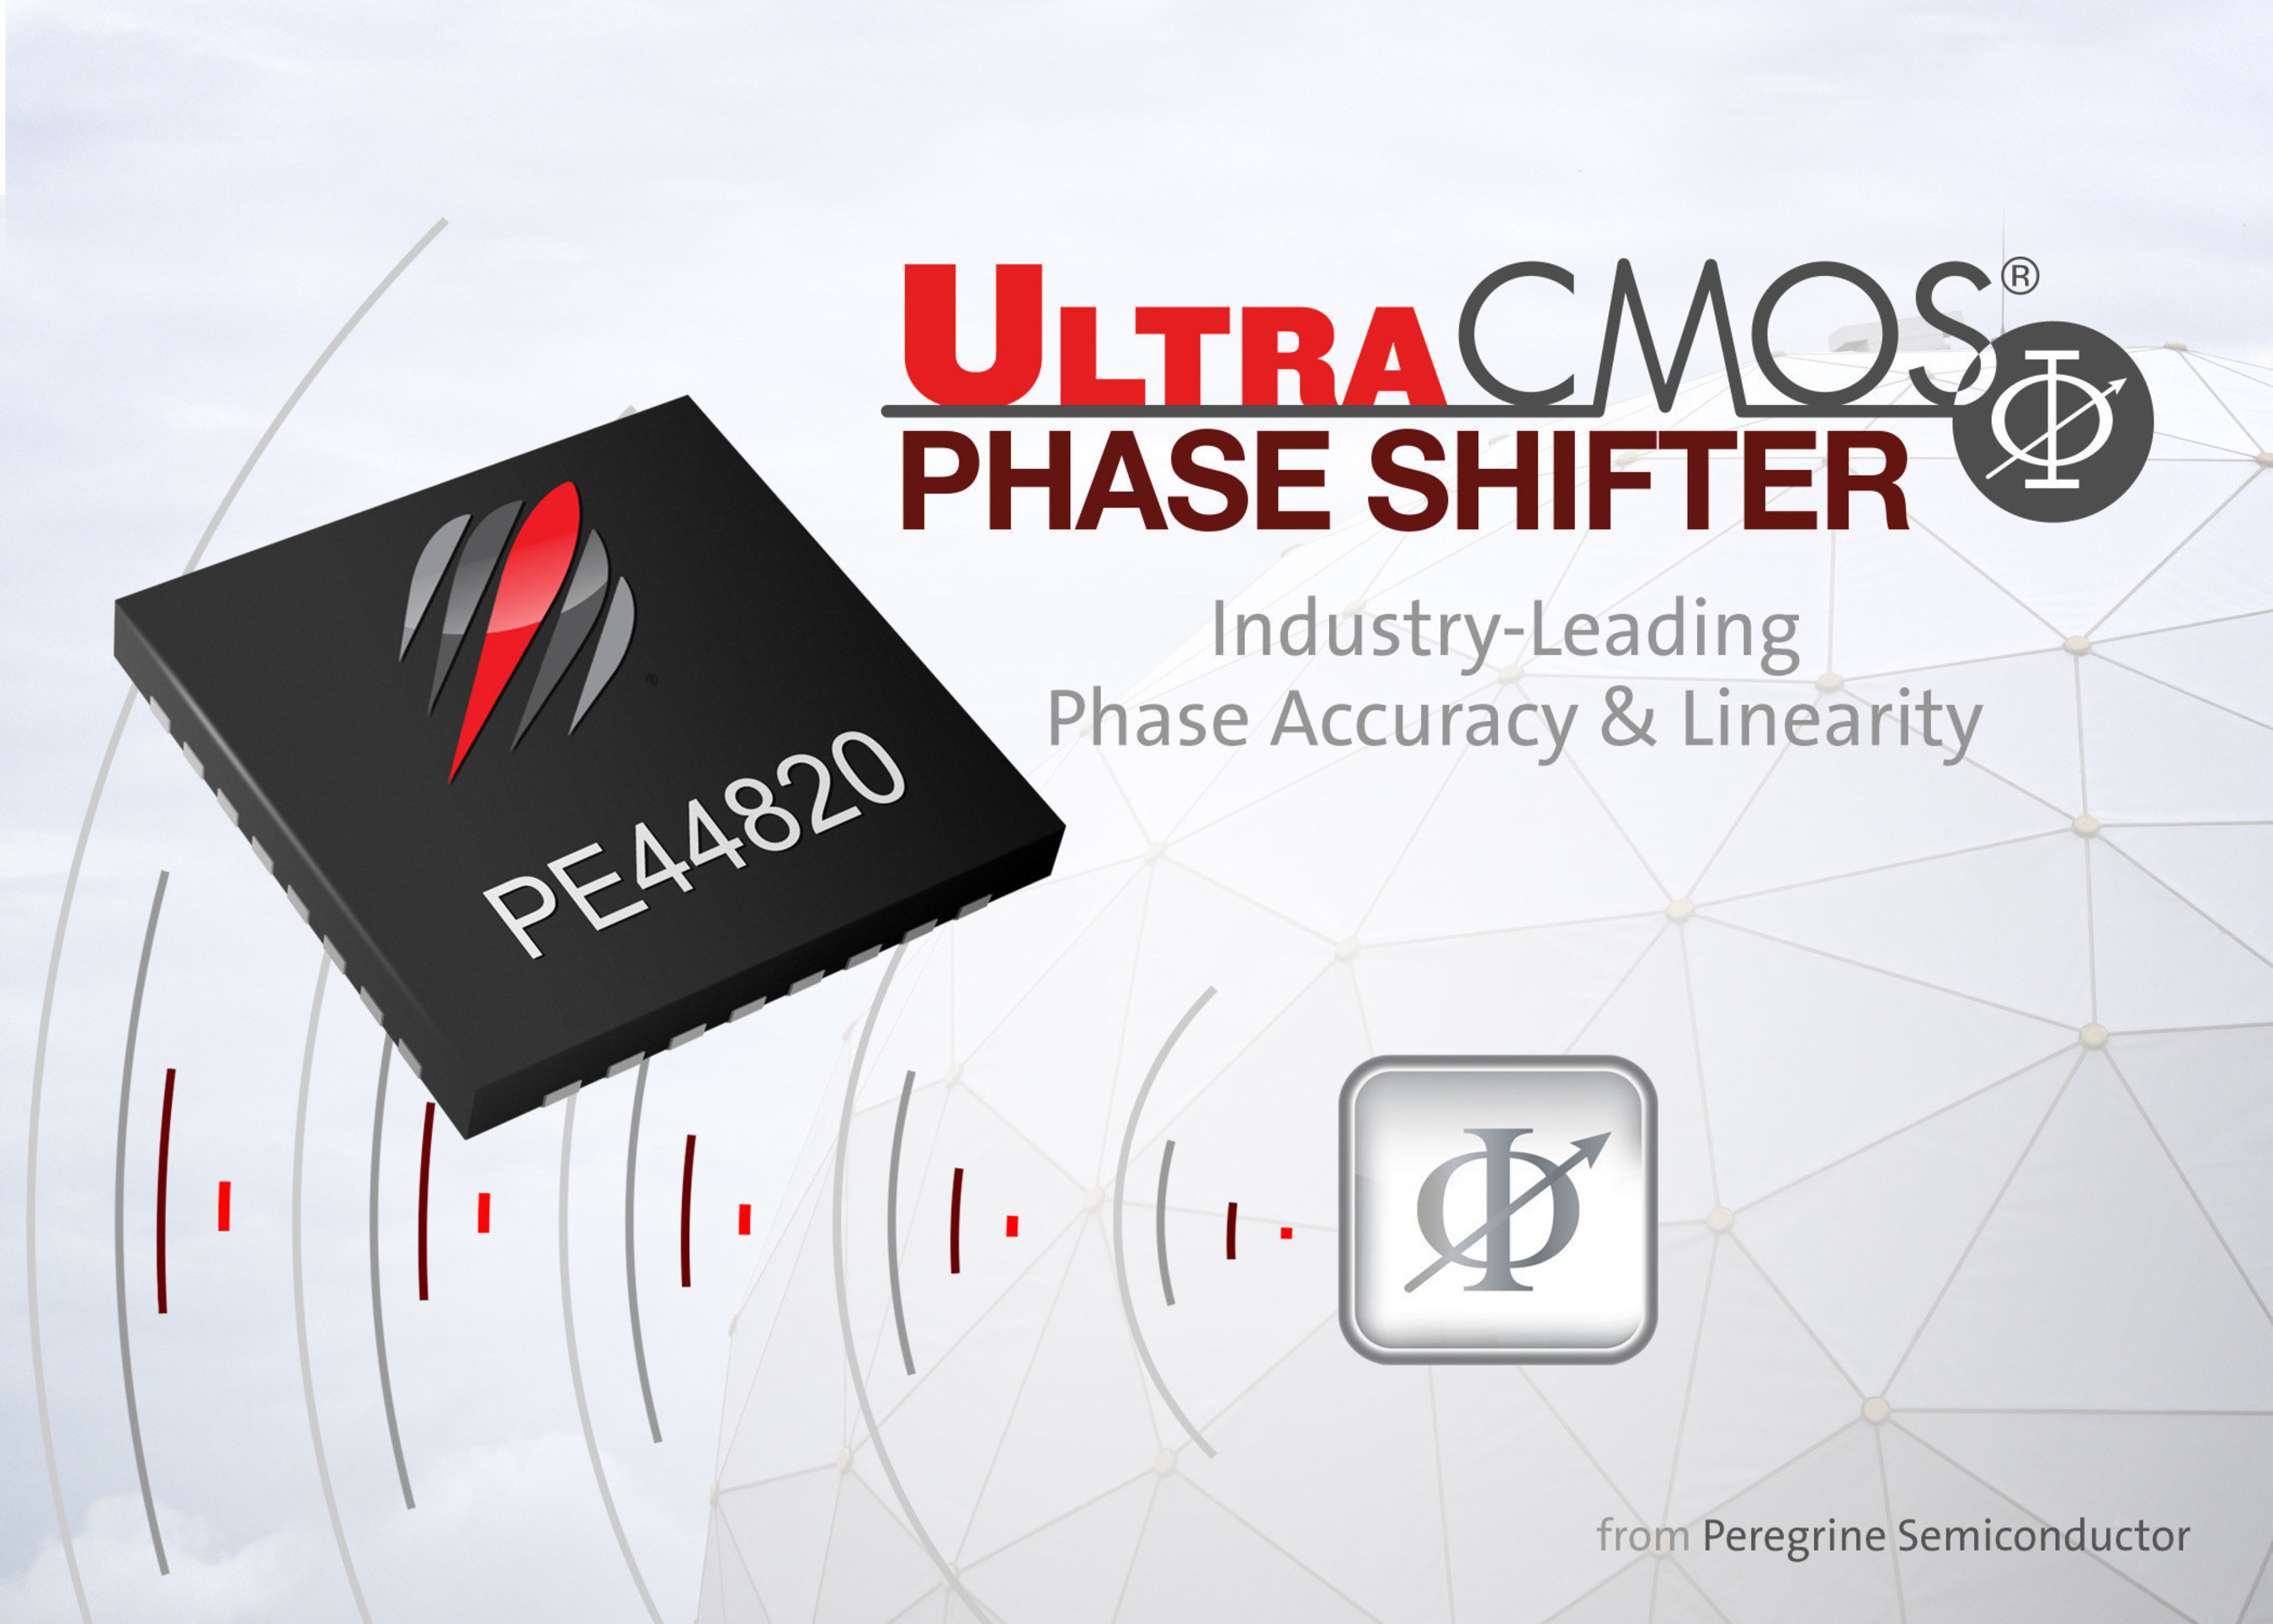 Peregrine Semiconductor's new UltraCMOS(R) PE44820 is an 8-bit digital phase shifter that delivers exceptional phase accuracy and high linearity for active antenna applications.